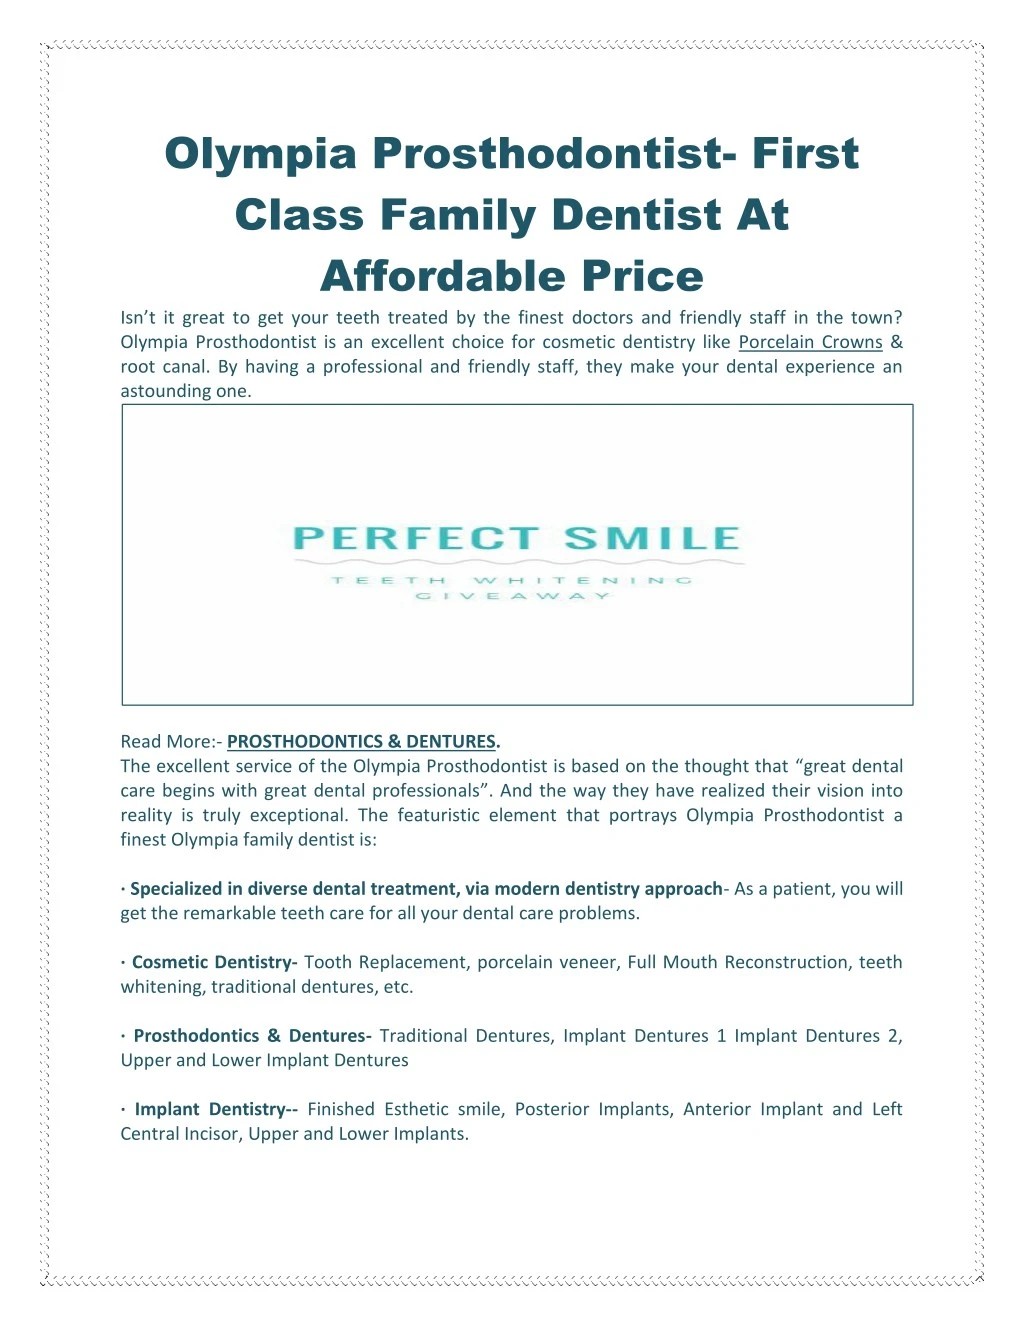 olympia prosthodontist first class family dentist